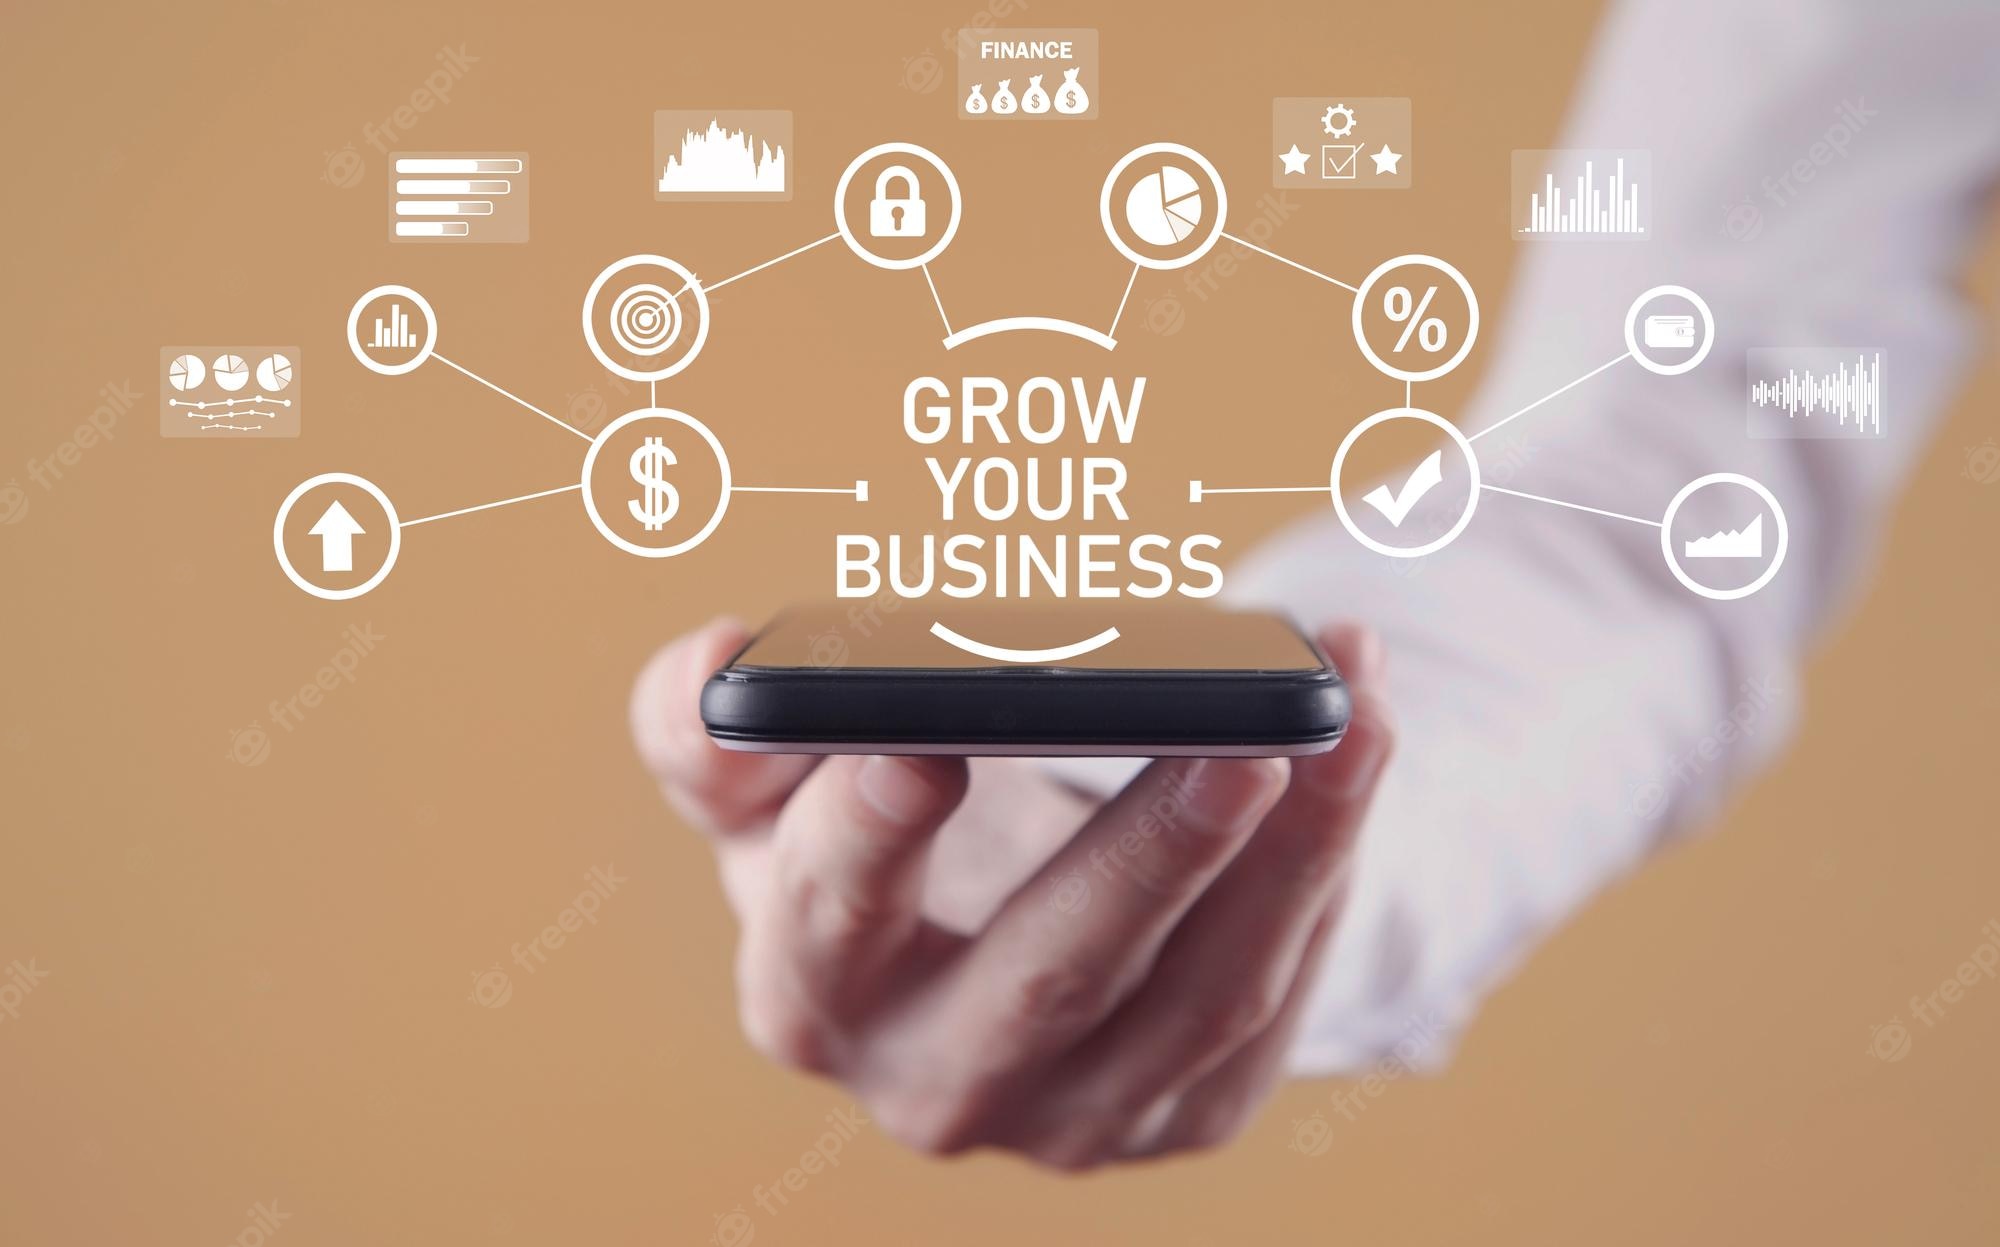 6 Financial Technology Partners To Help You Grow Your Business